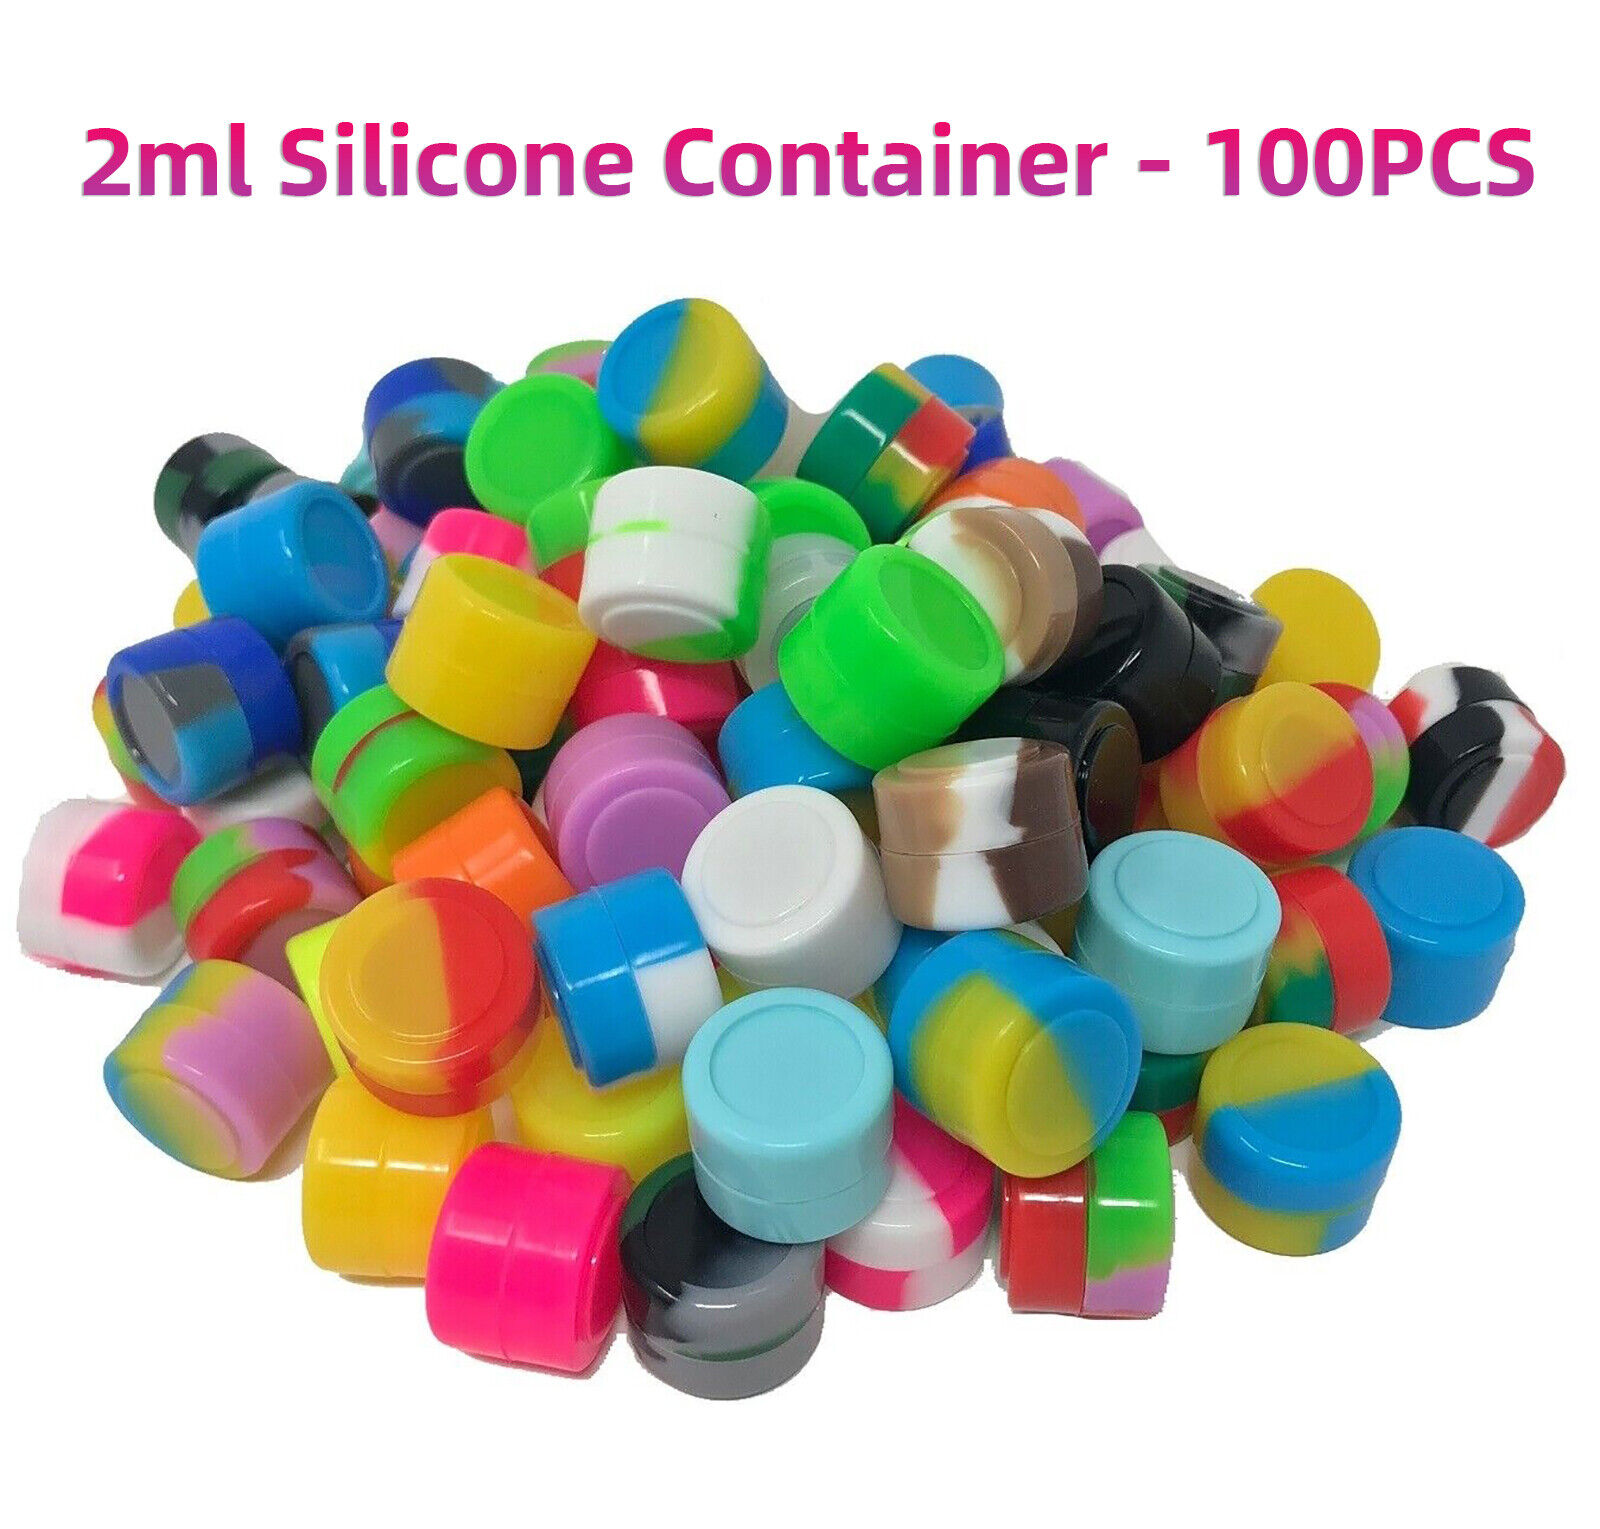 2ml Silicone Container Jar Non-Stick Mixed colors Round Wholesale lot 100pcs